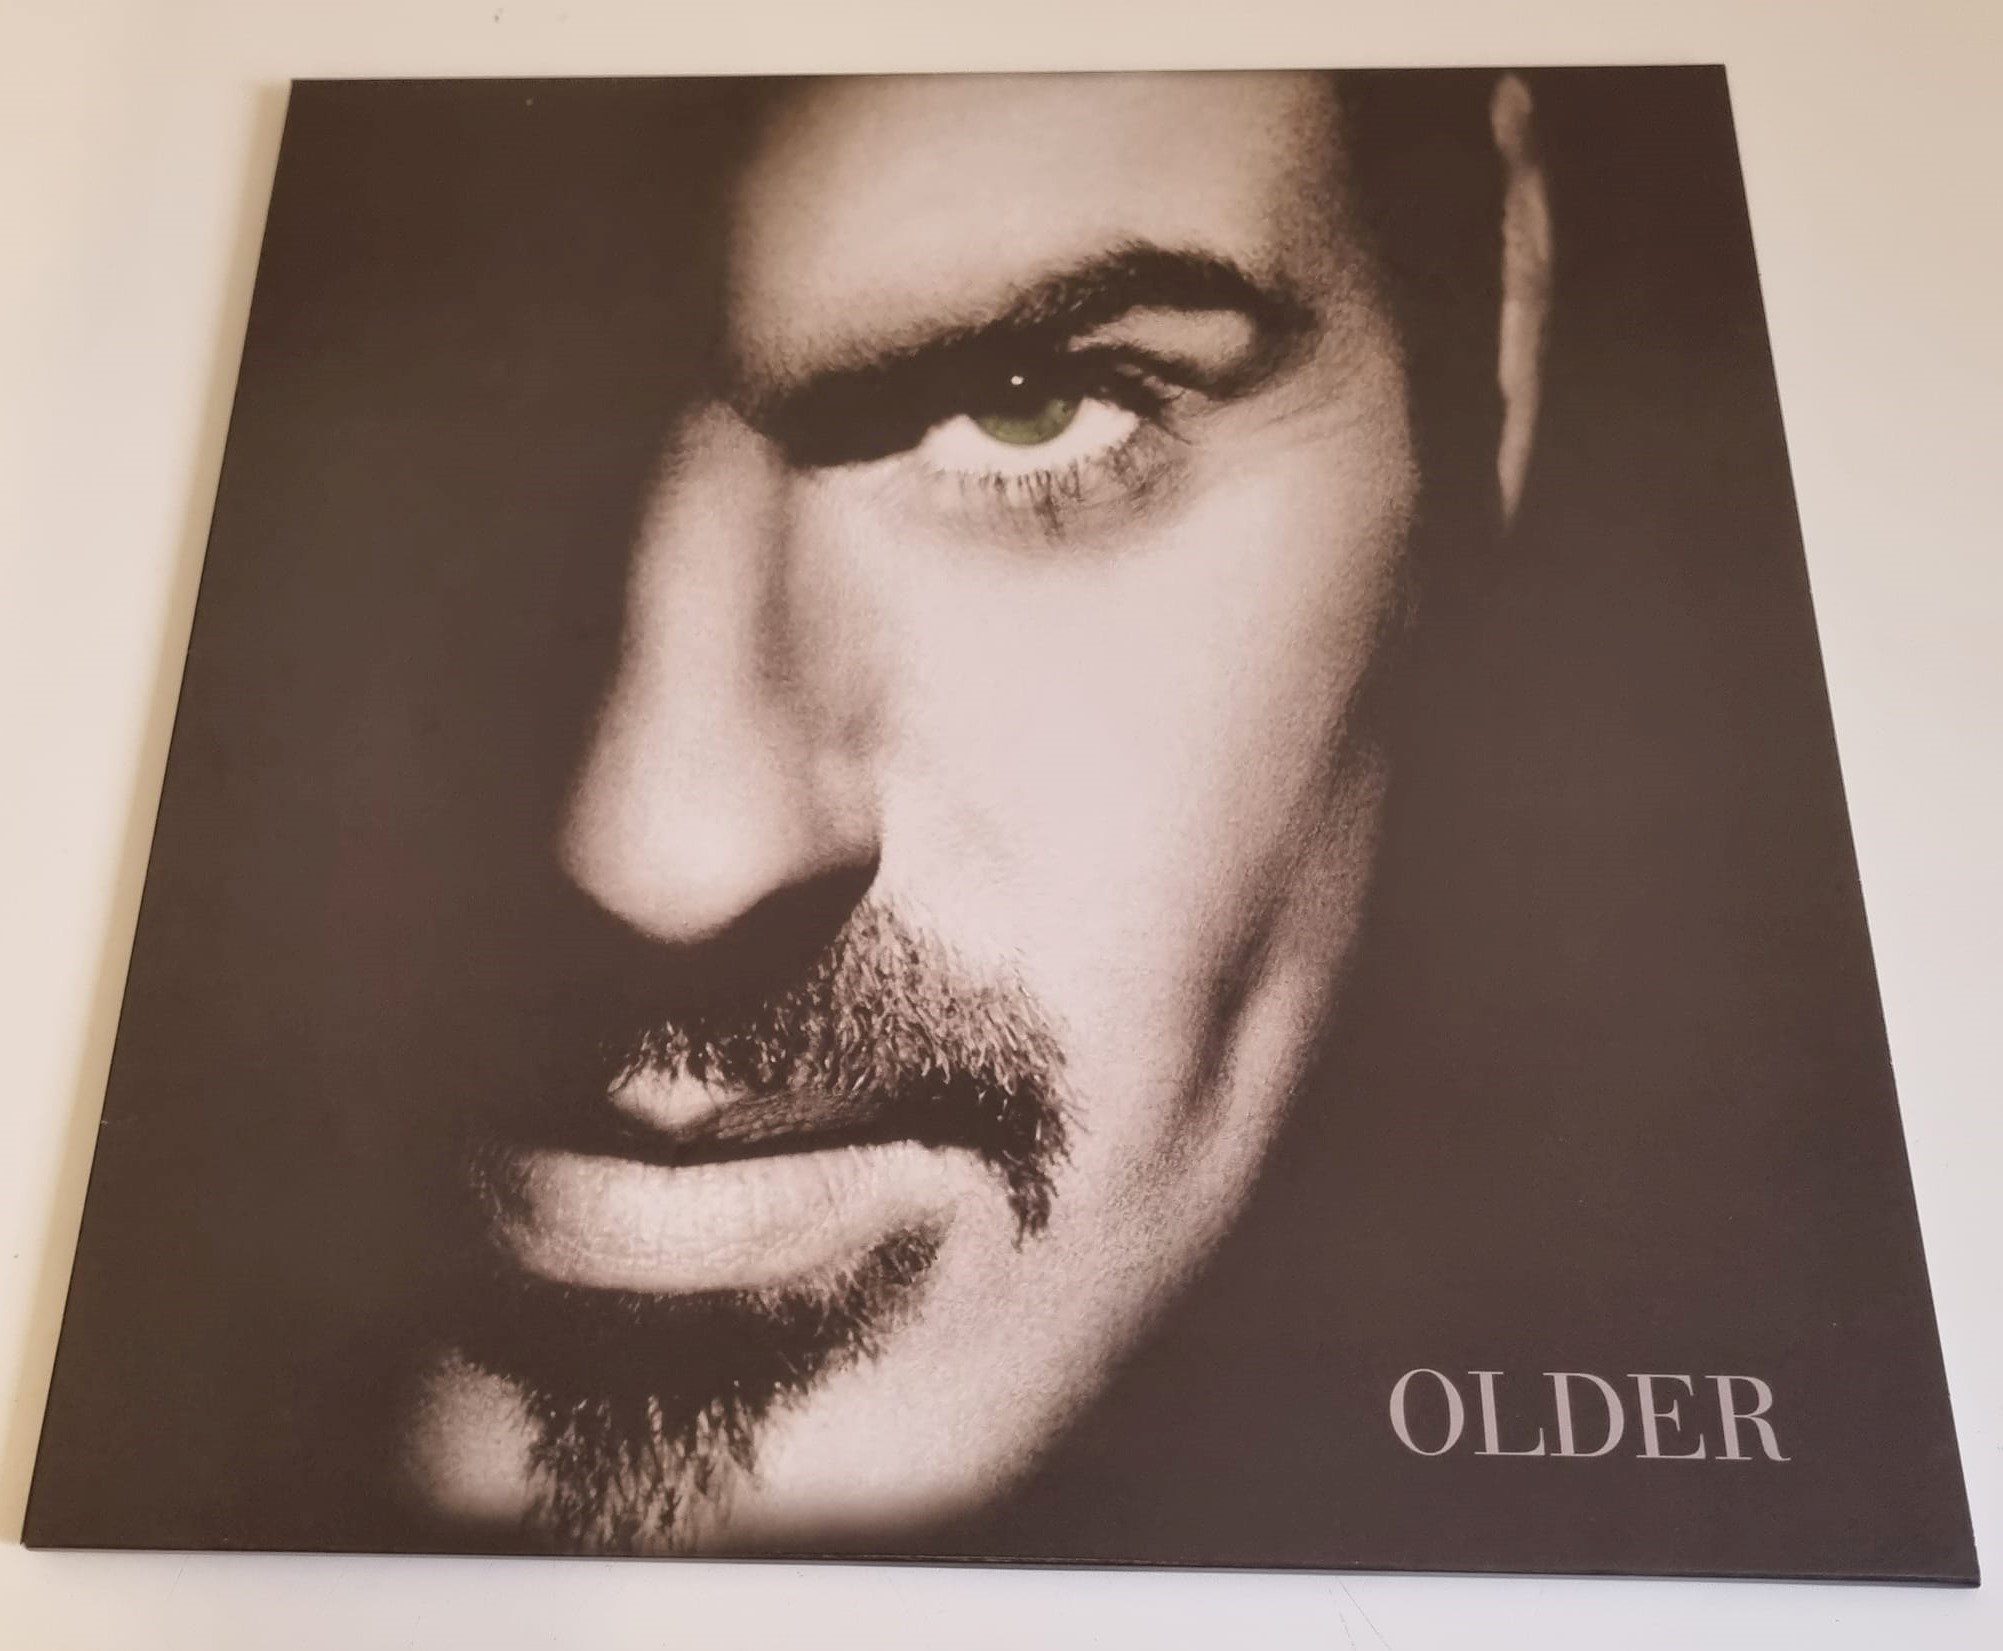 Buy this rare George Michael record by clicking here